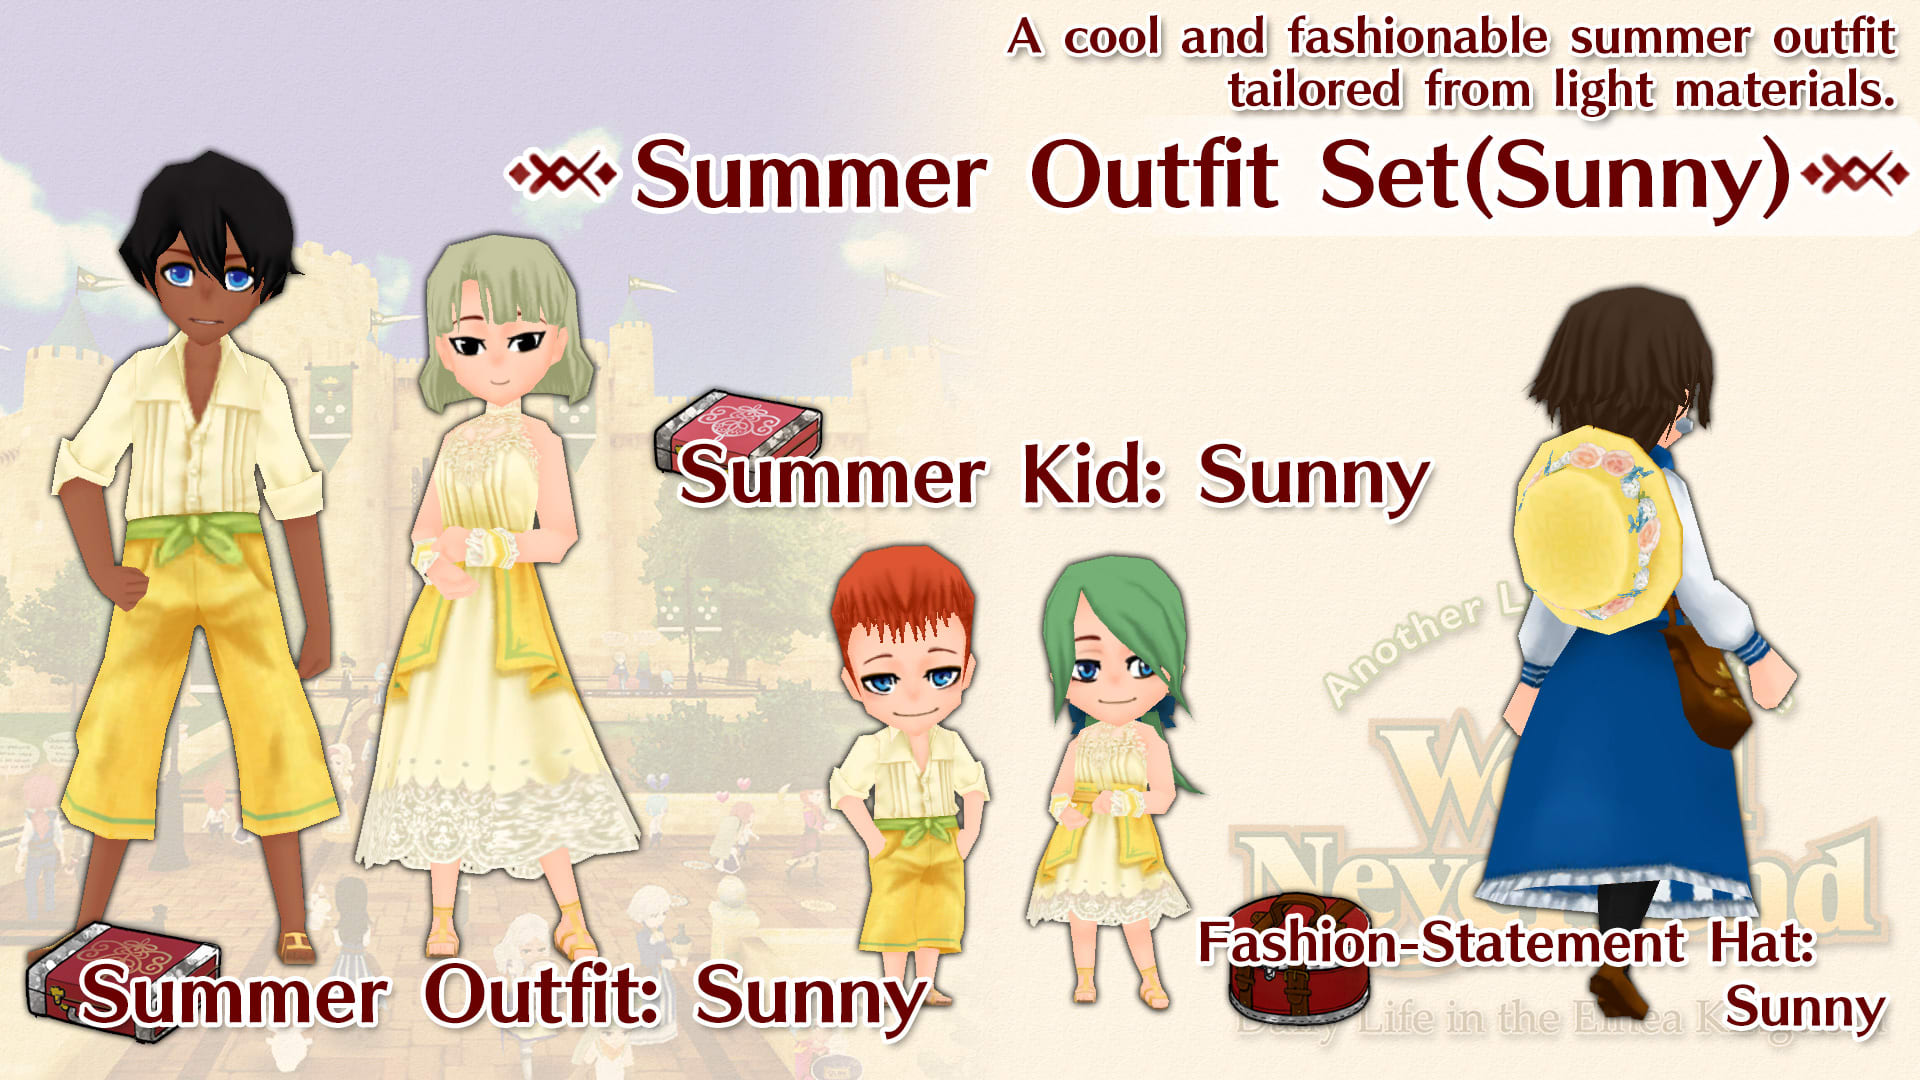 Summer Outfit Set(Sunny)